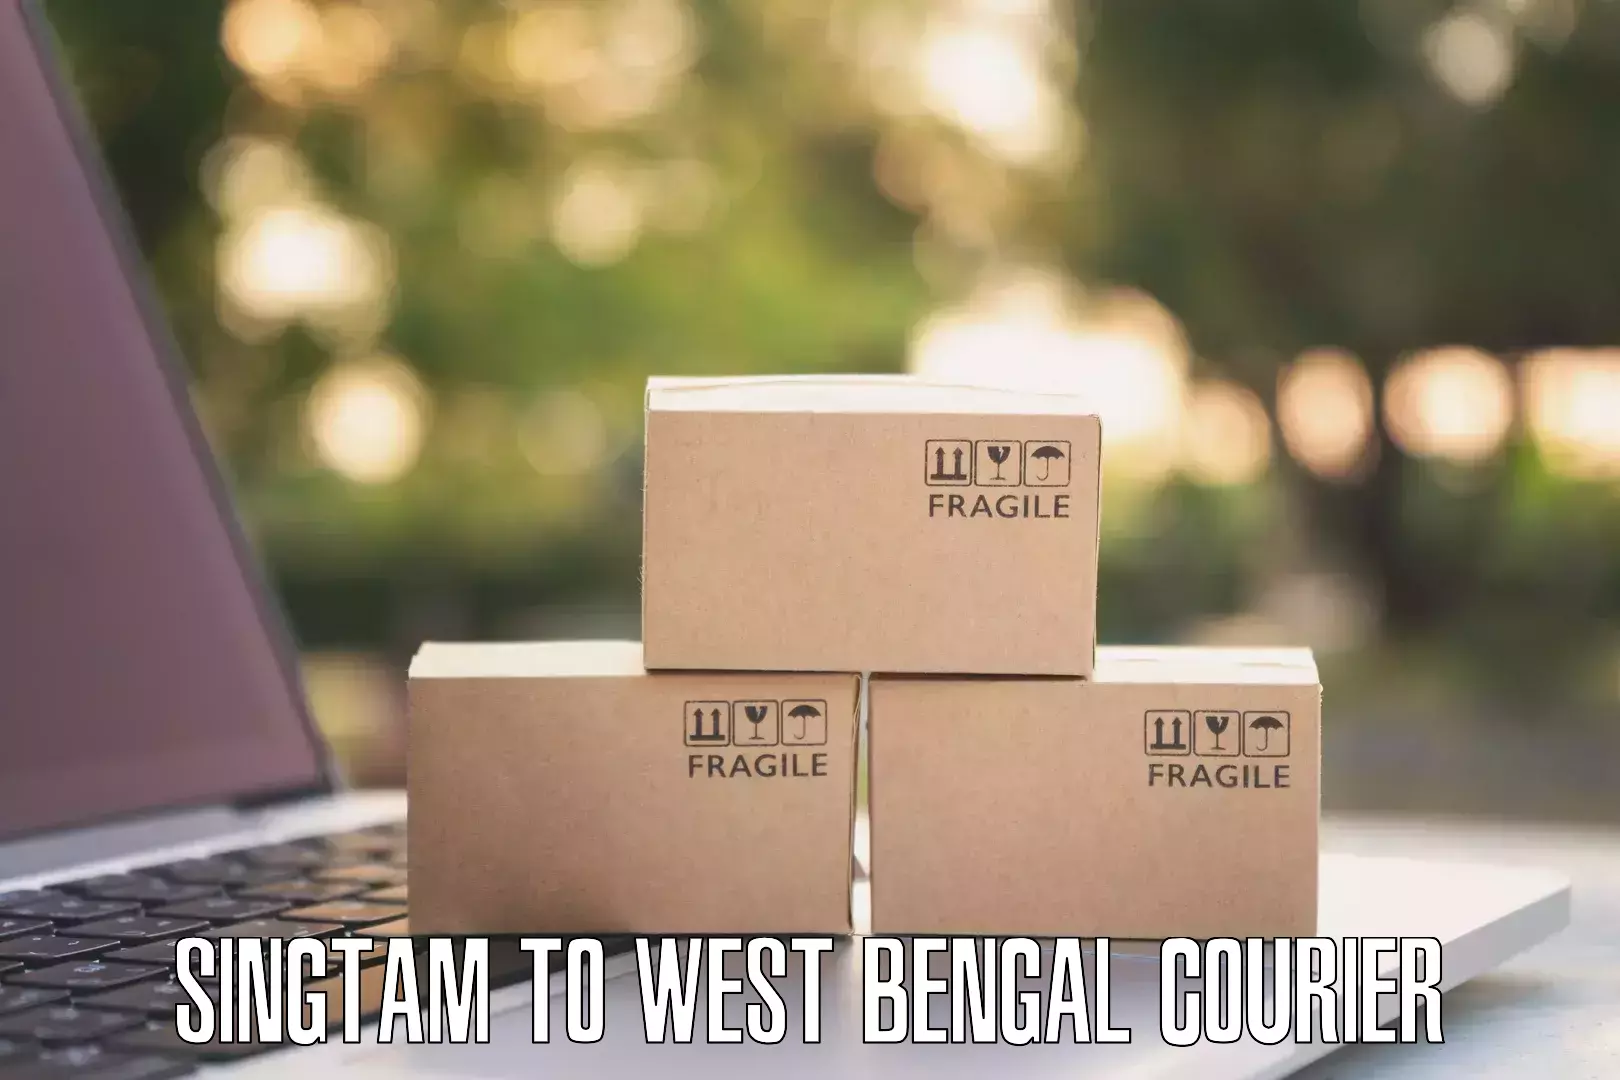 Full-service courier options Singtam to West Bengal